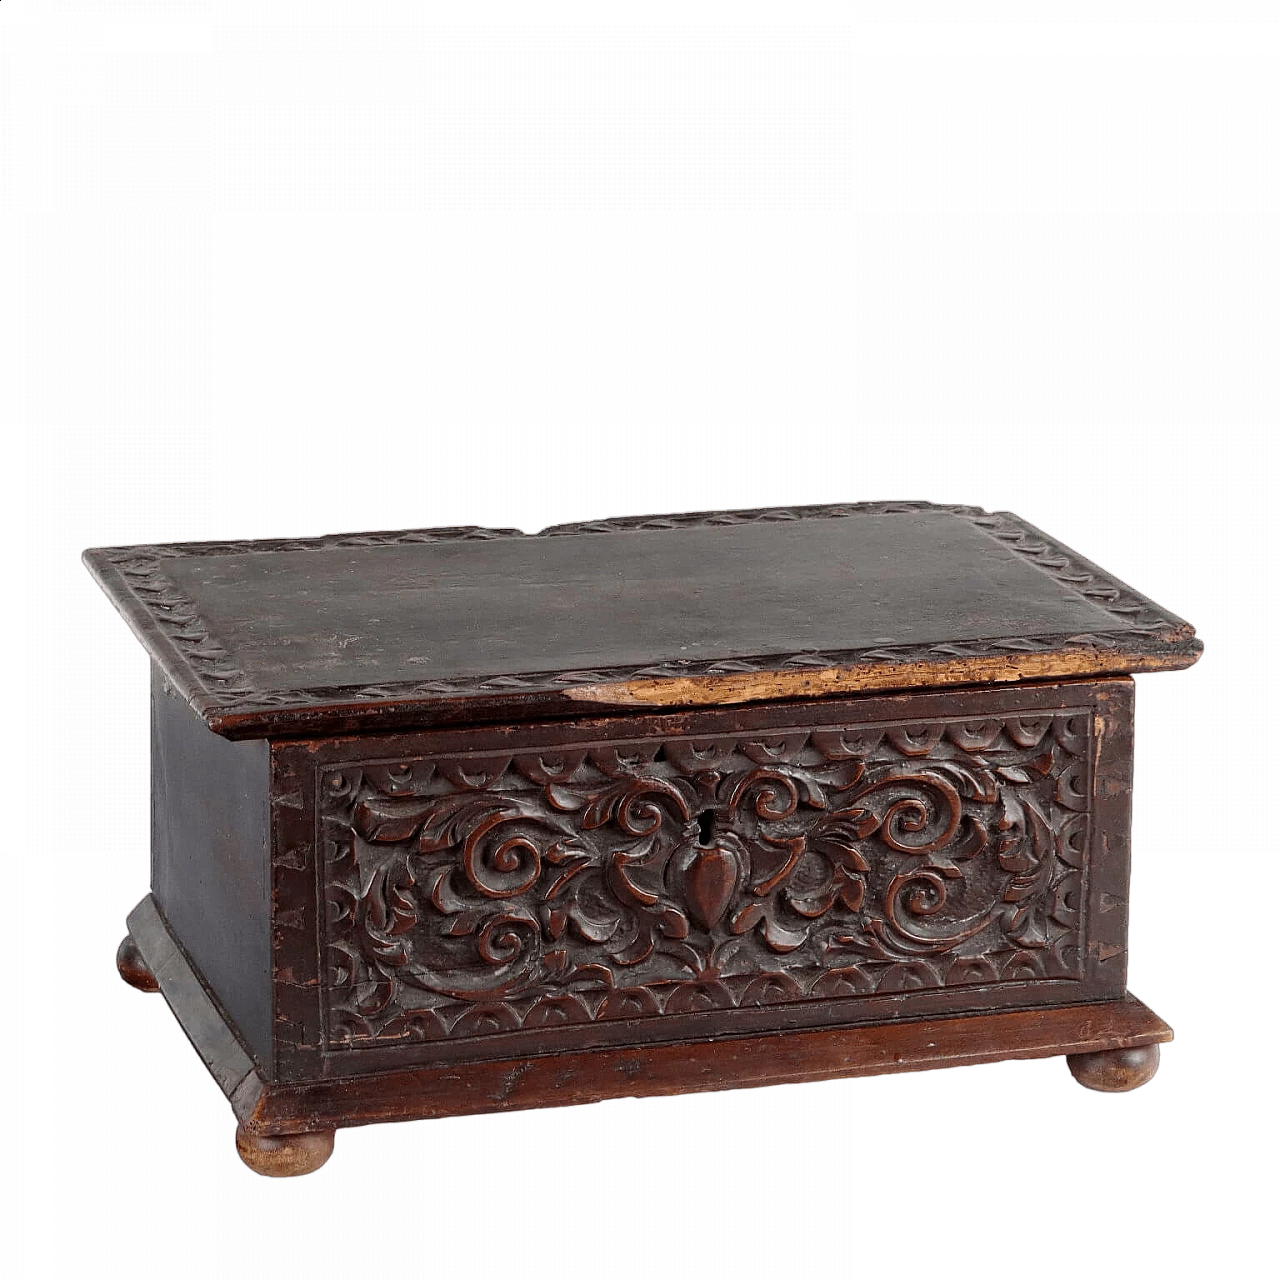 Late Renaissance walnut box with carved front, early 17th century 11